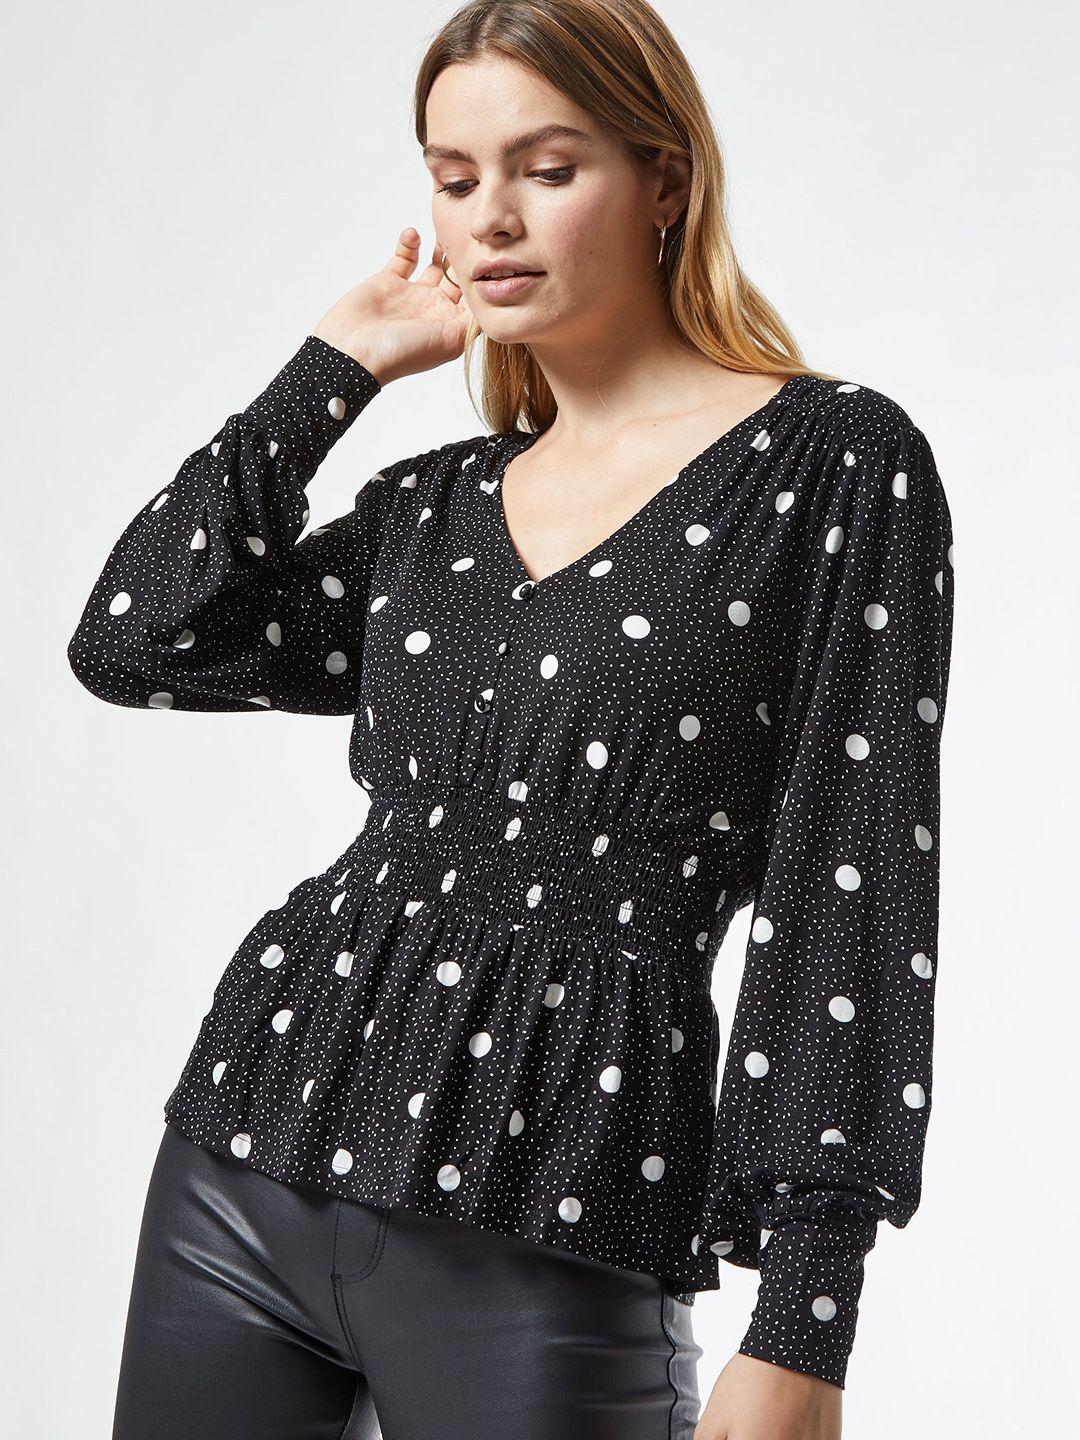 dorothy perkins women black & white knitted polka dots printed cinched waist top